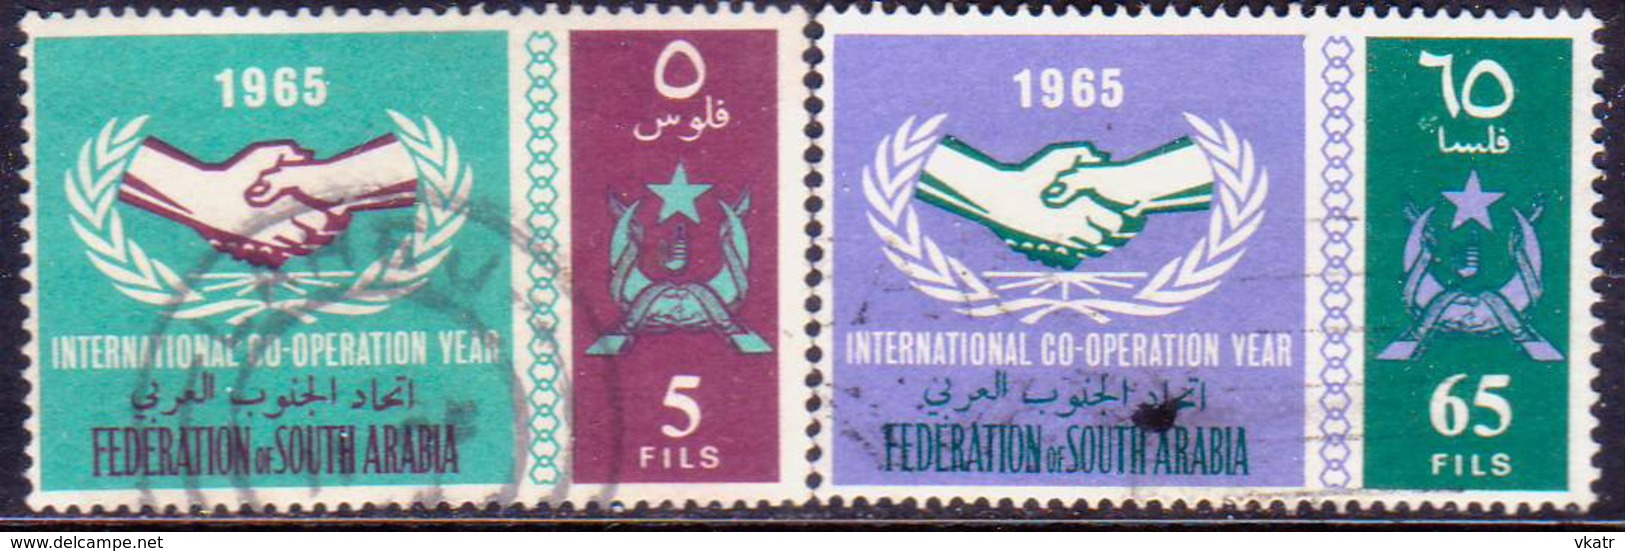 SOUTH ARABIAN FEDERATION 1965 SG #17-18 Compl.set Used Int.Co-operation Year - Asia (Other)